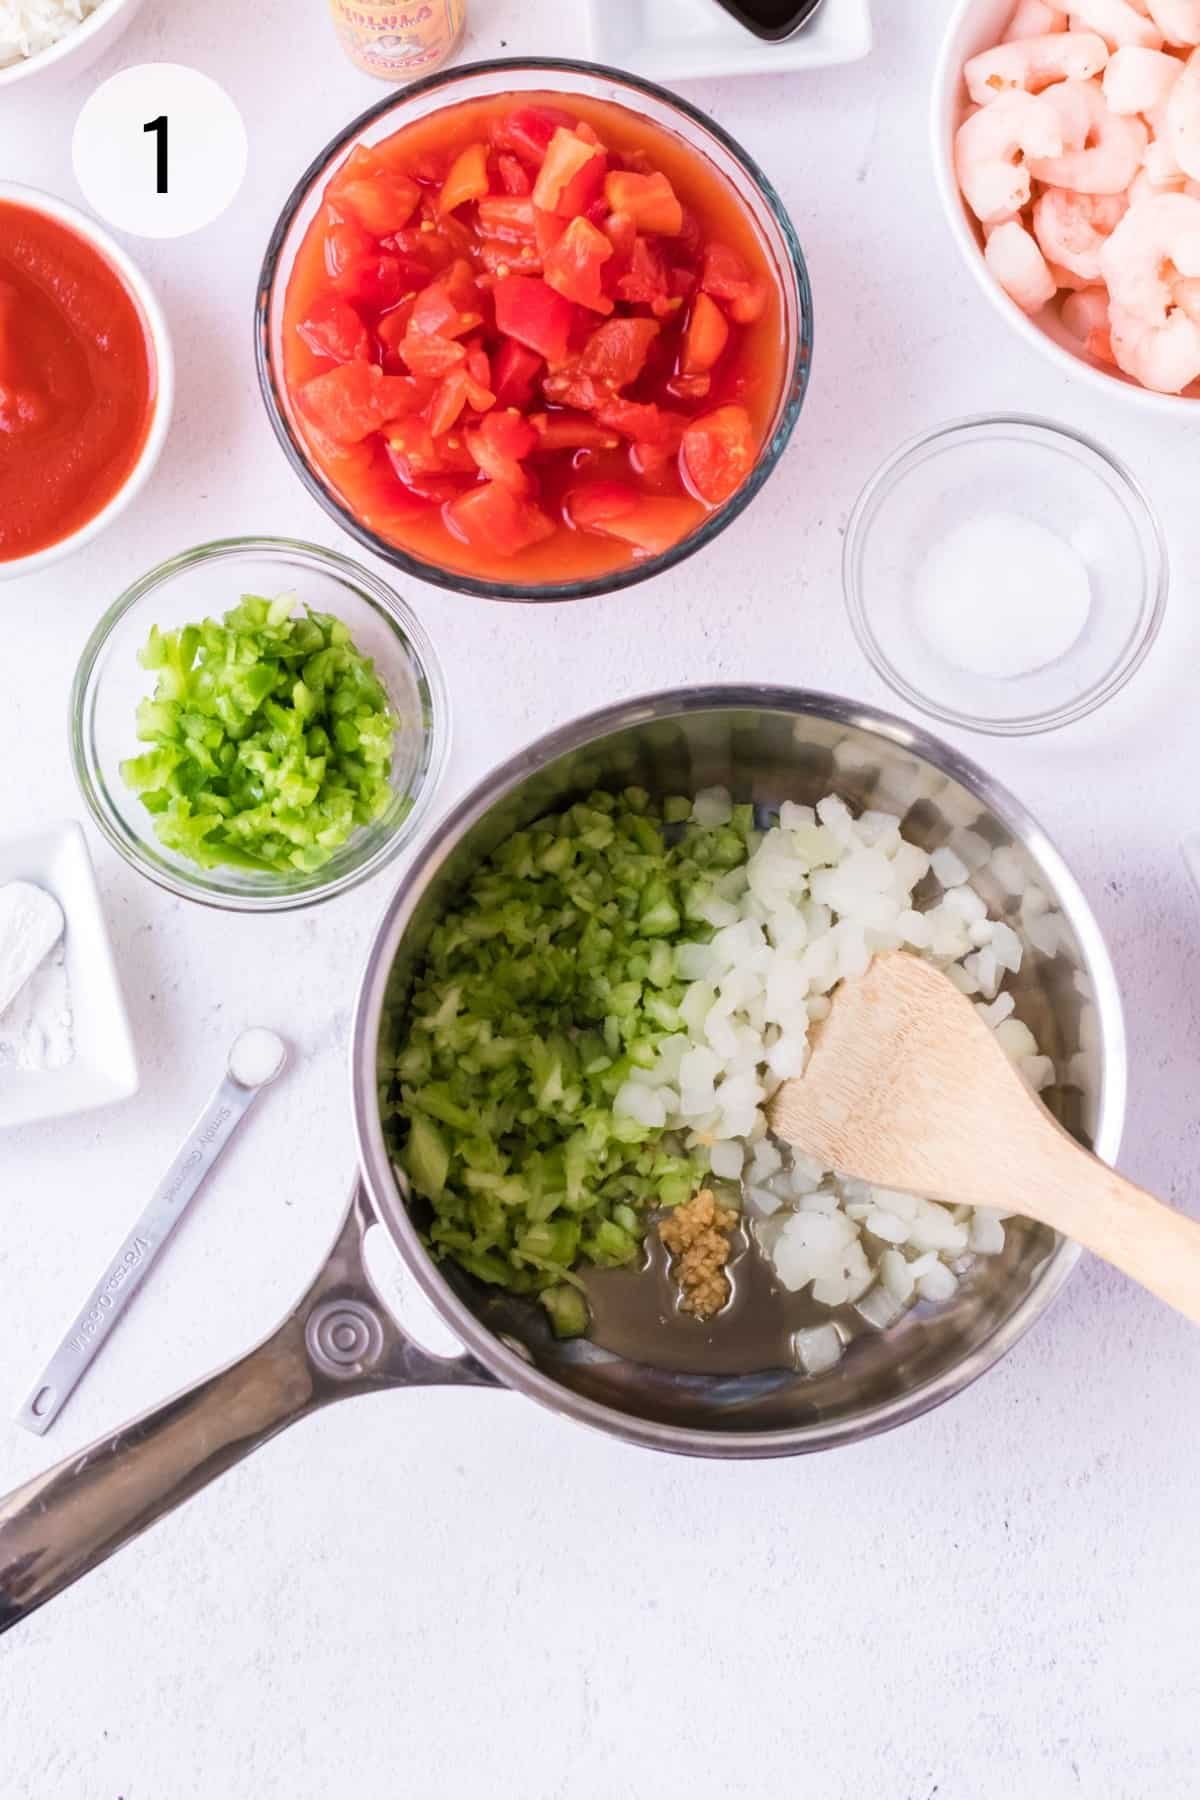 Silver saucepan with chopped celery, onions and garlic in a pan with wooden spoon and other creole sauce ingredients like green bell peppers, diced tomatoes, shrimp and sugar surrounding pan.